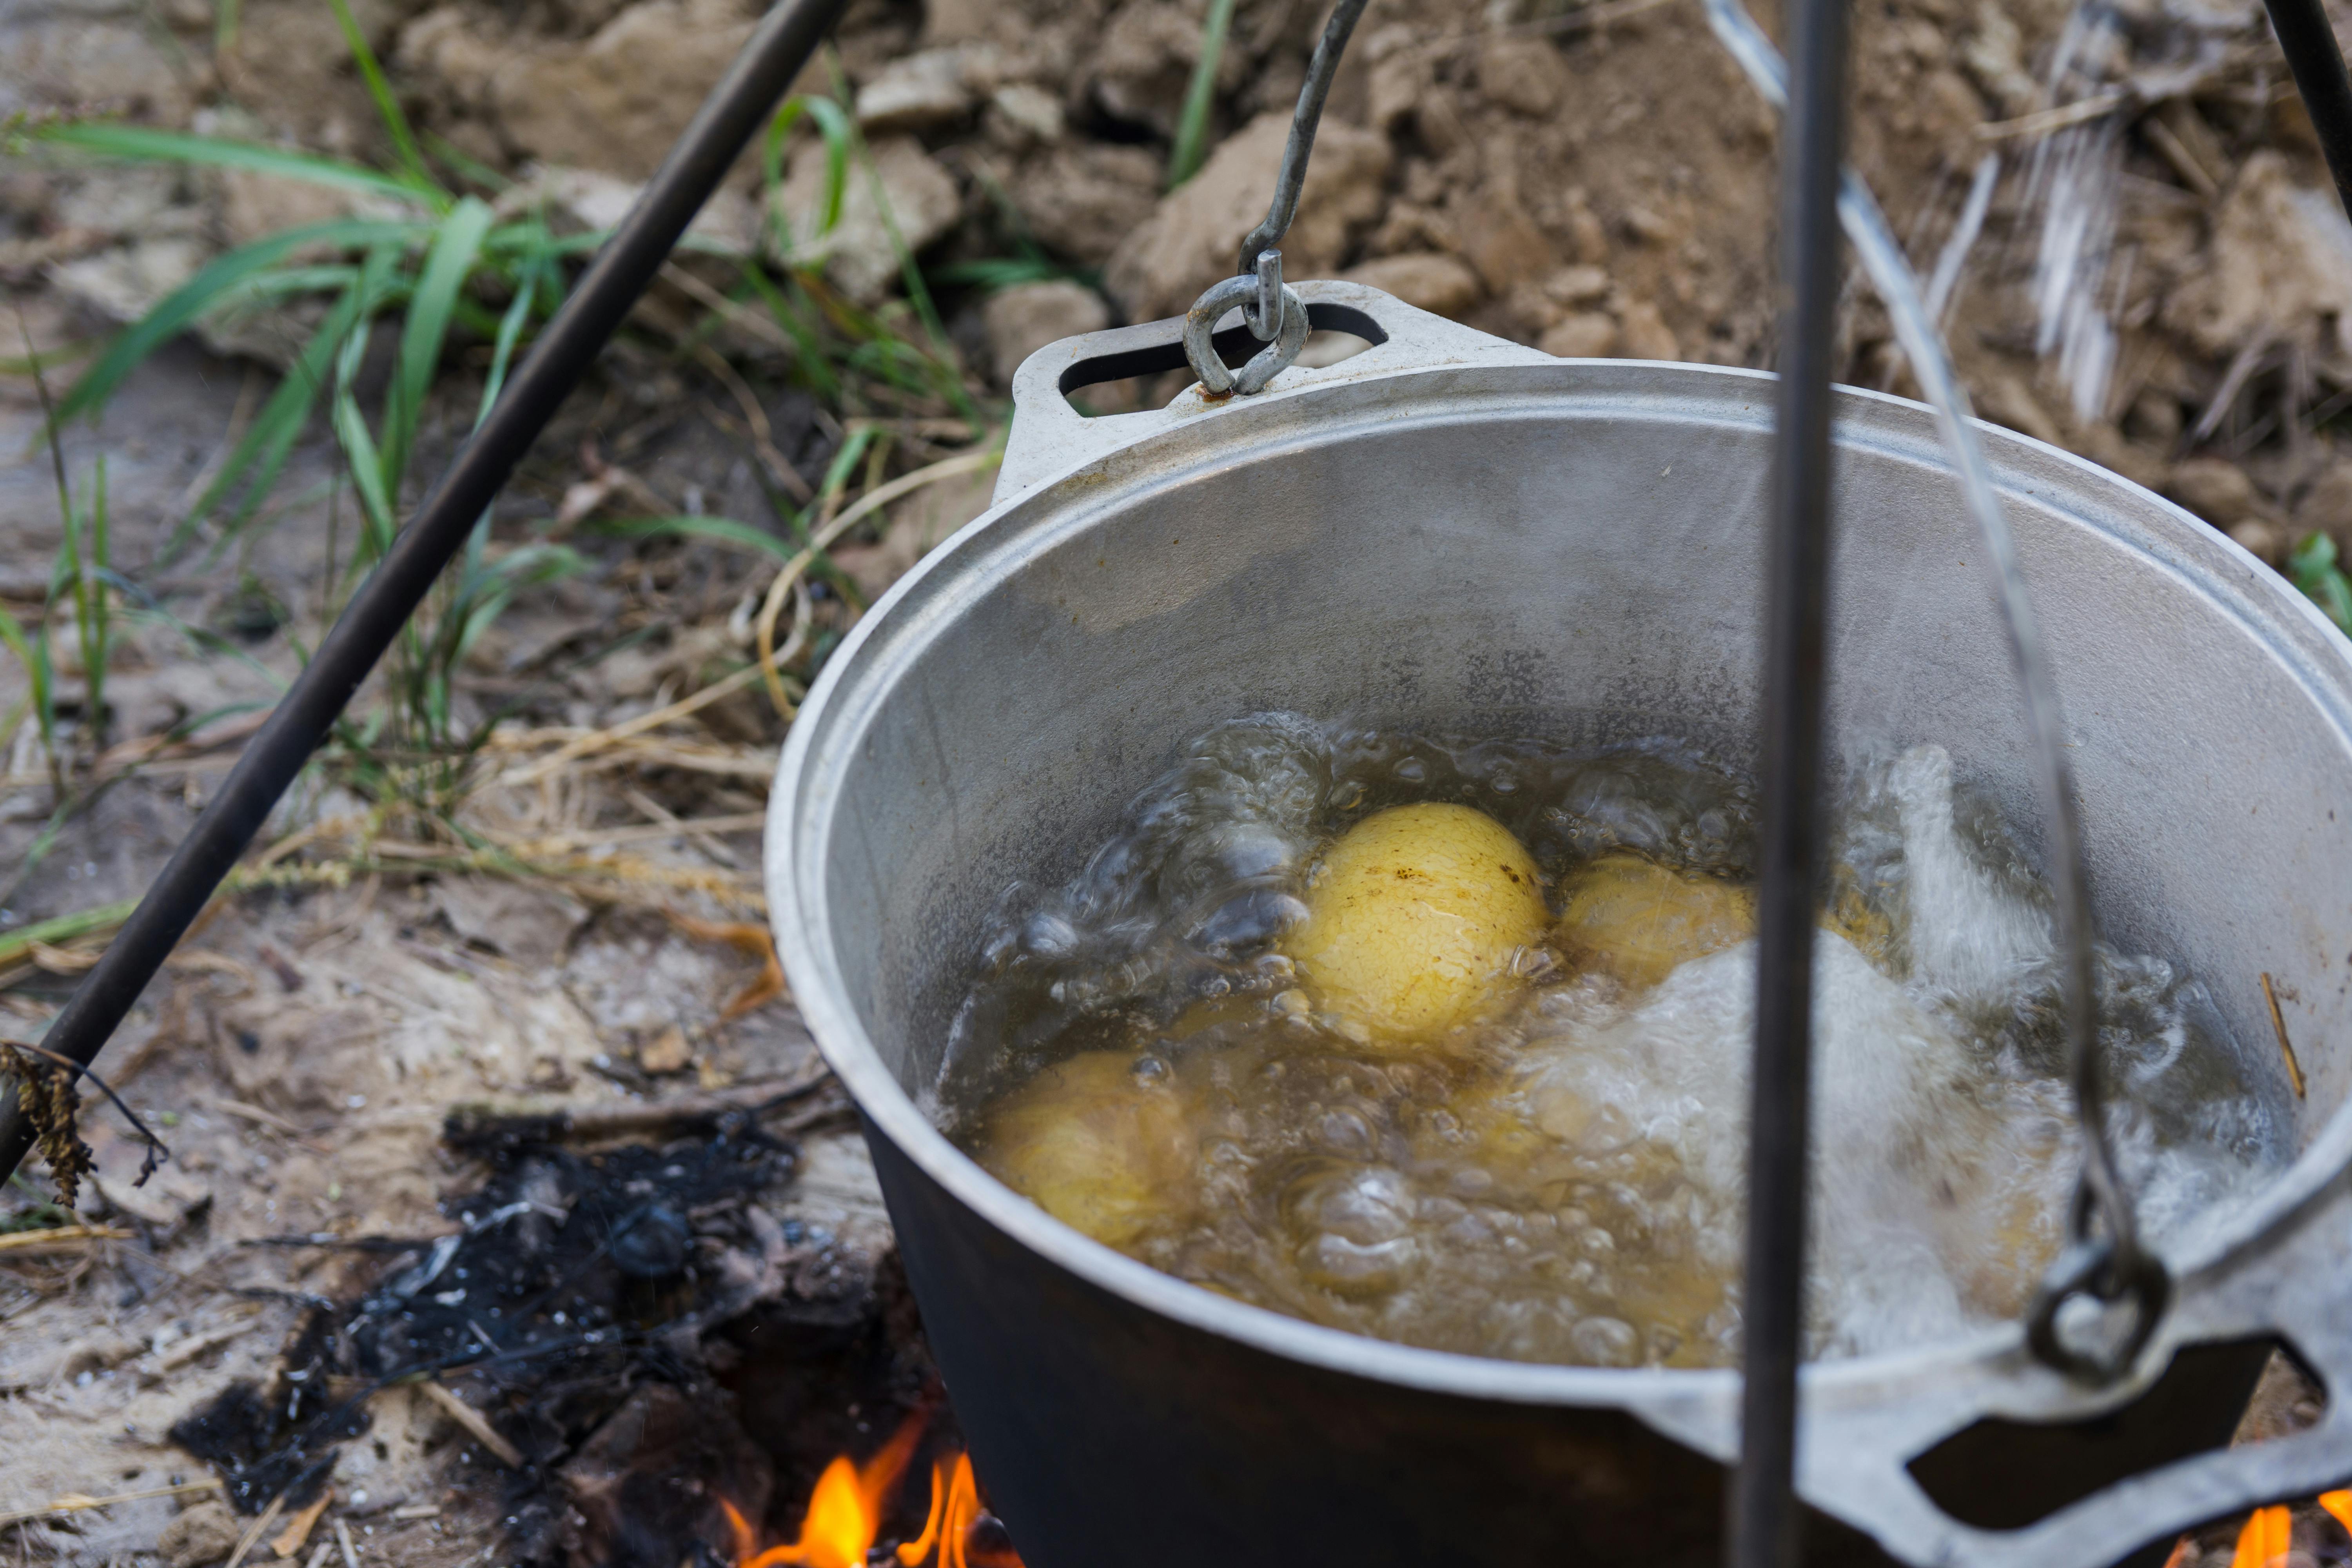 Potatoes boiling in water in a pot hung over I campfire